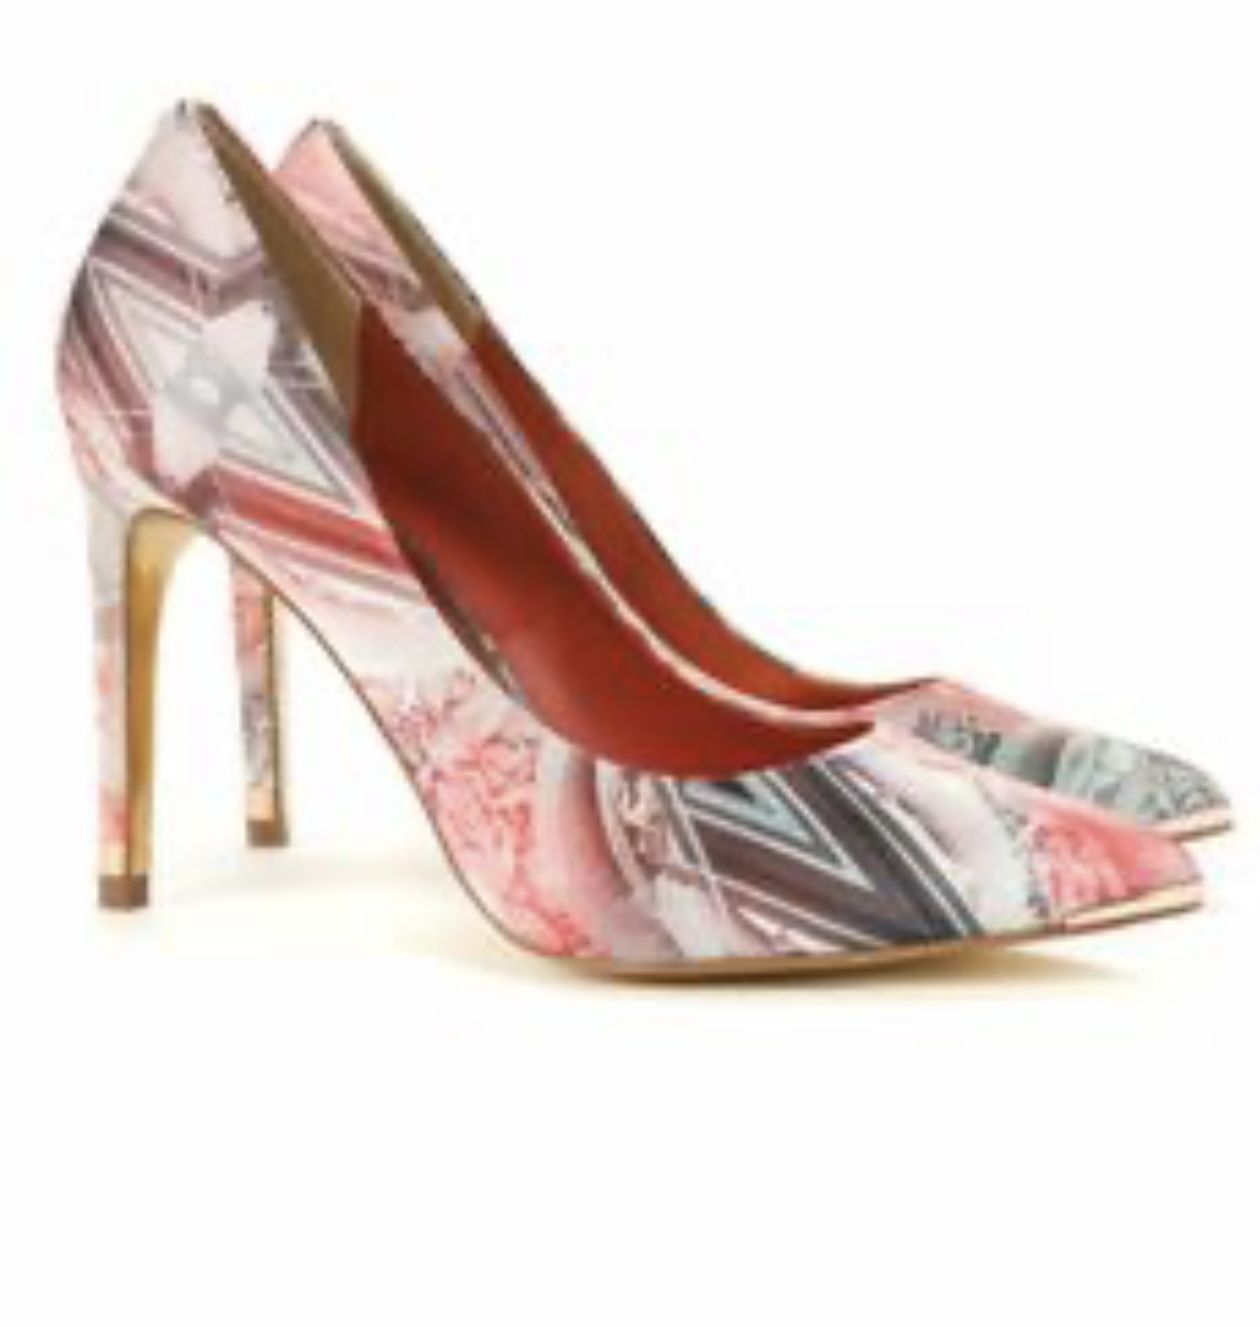 TED BAKER LONDON Pink/Gold Satin Heel Shoes,Euro size 40